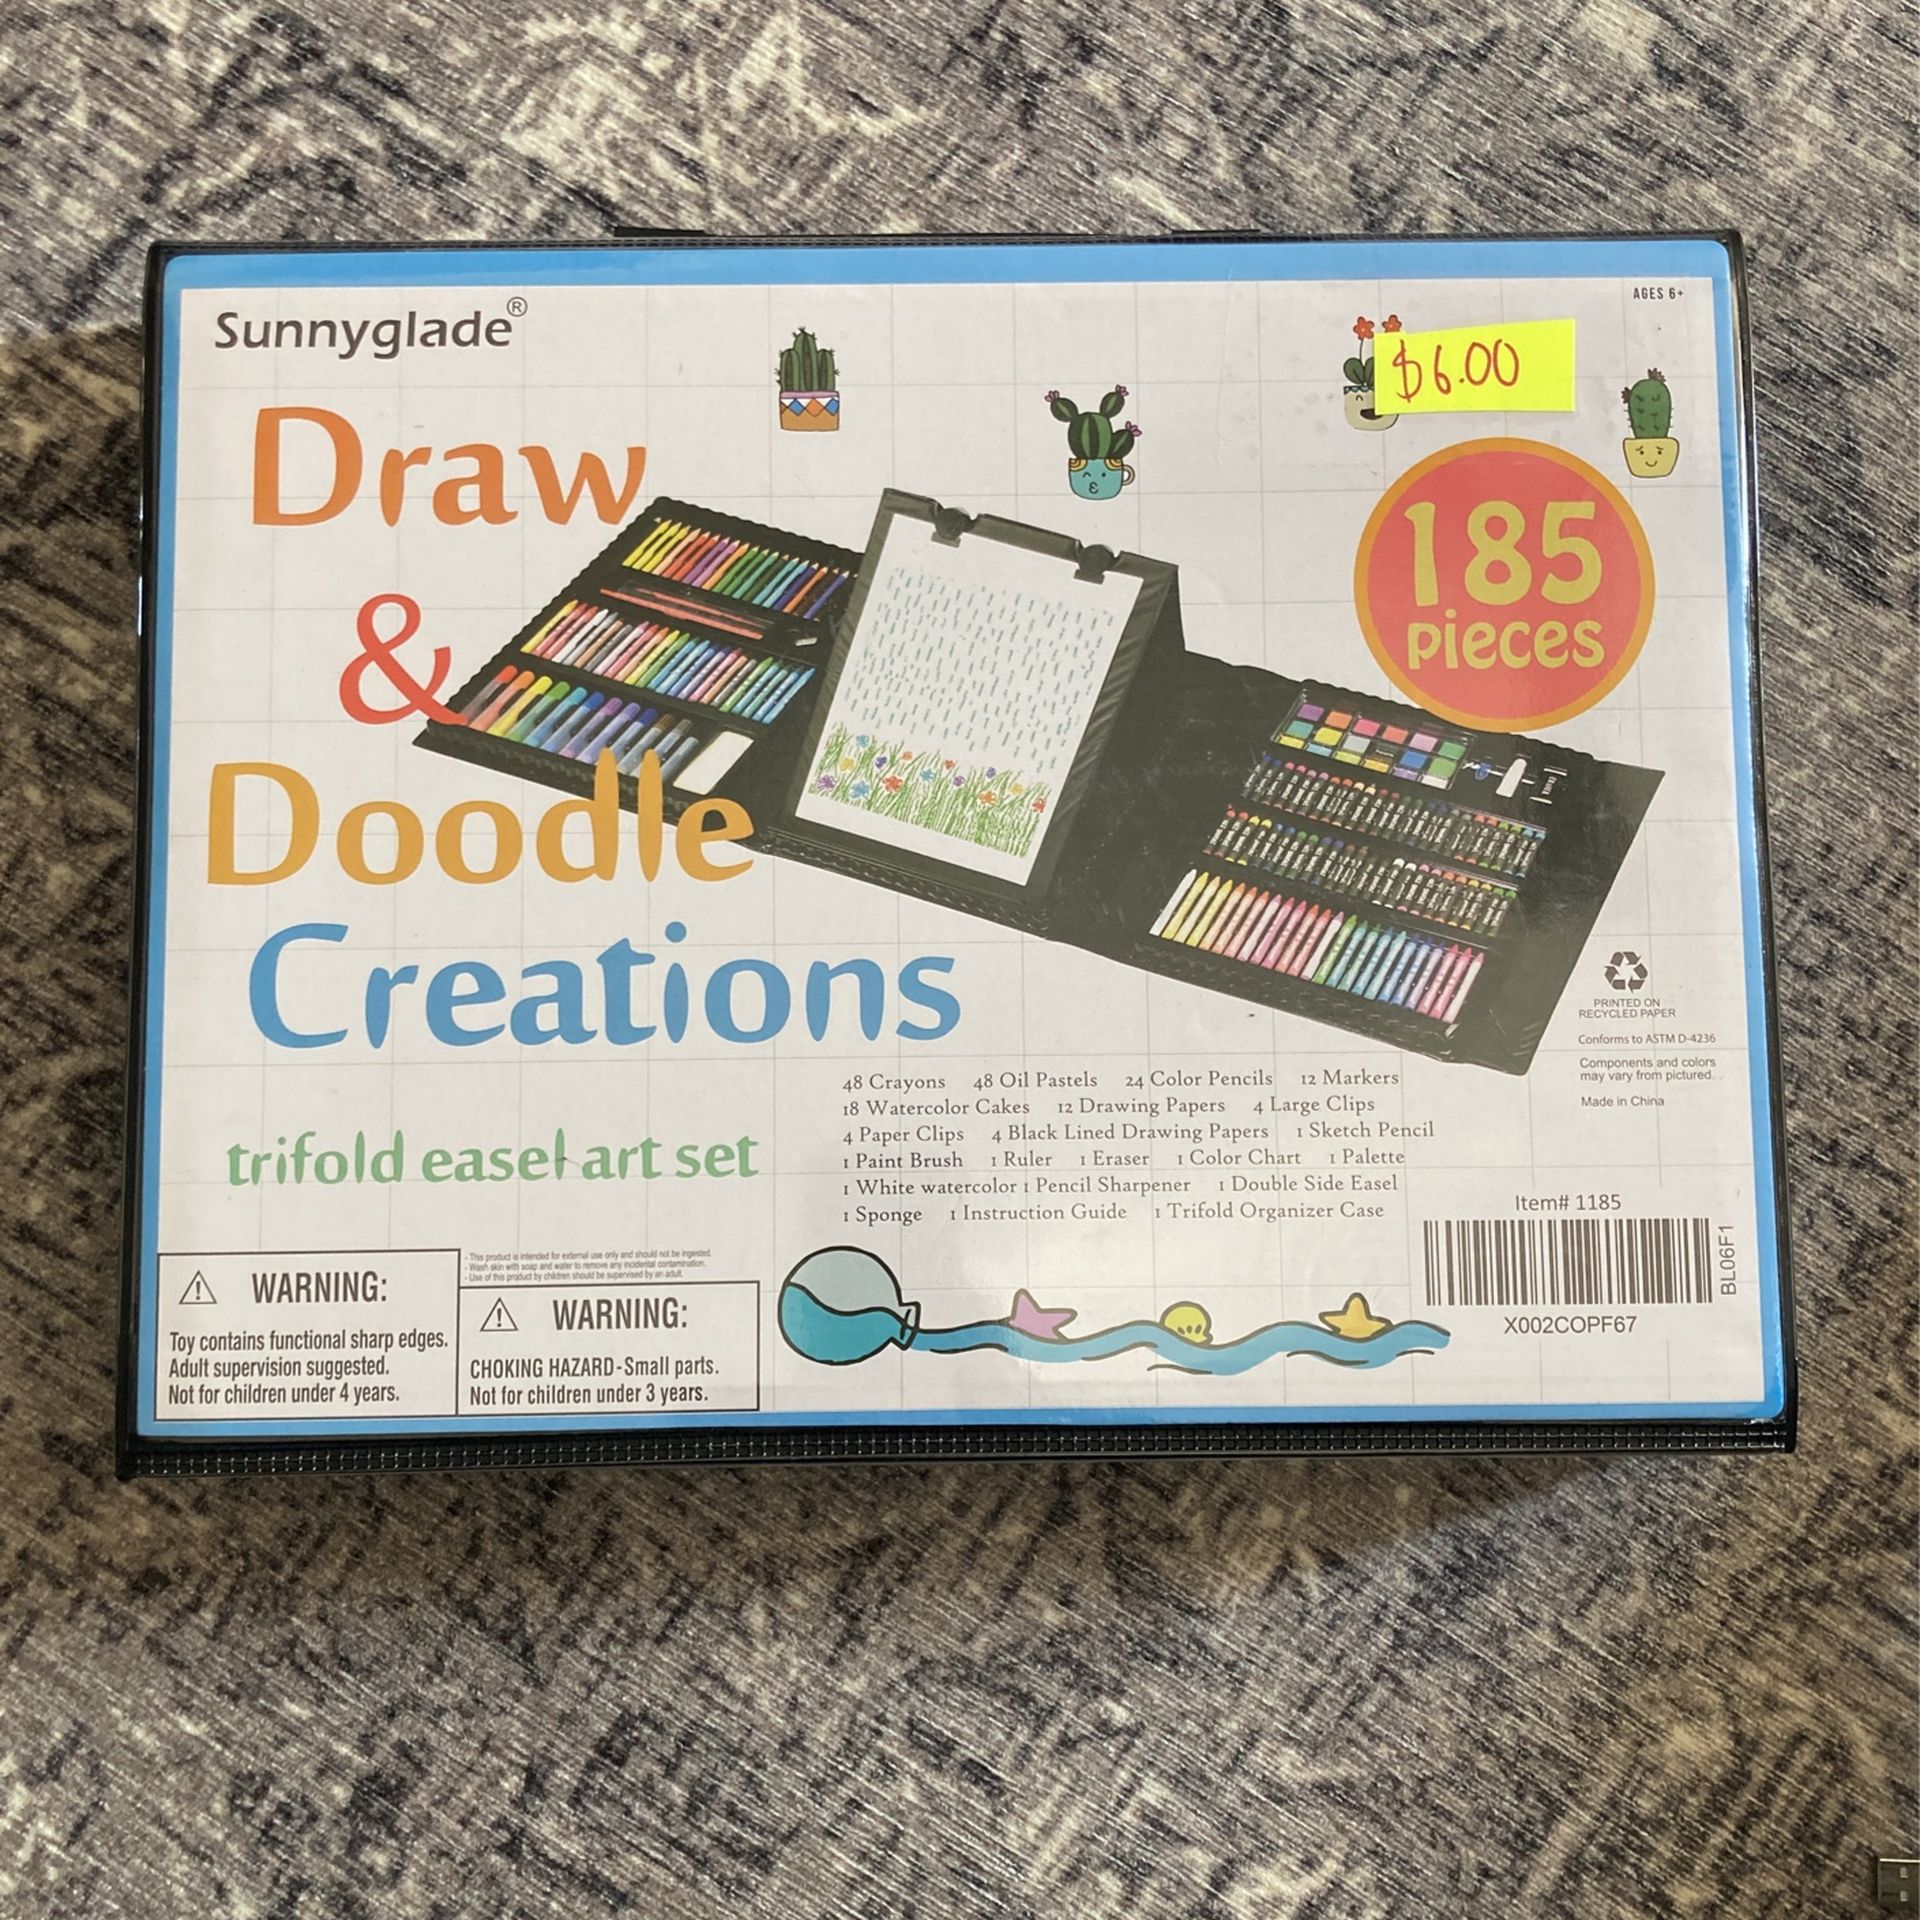 Sunnyglade 185 Pieces Double Sided Trifold Easel Art Set, Drawing Art Box  with Oil Pastels, Crayons, Colored Pencils, Markers, Paint Brush,  Watercolor